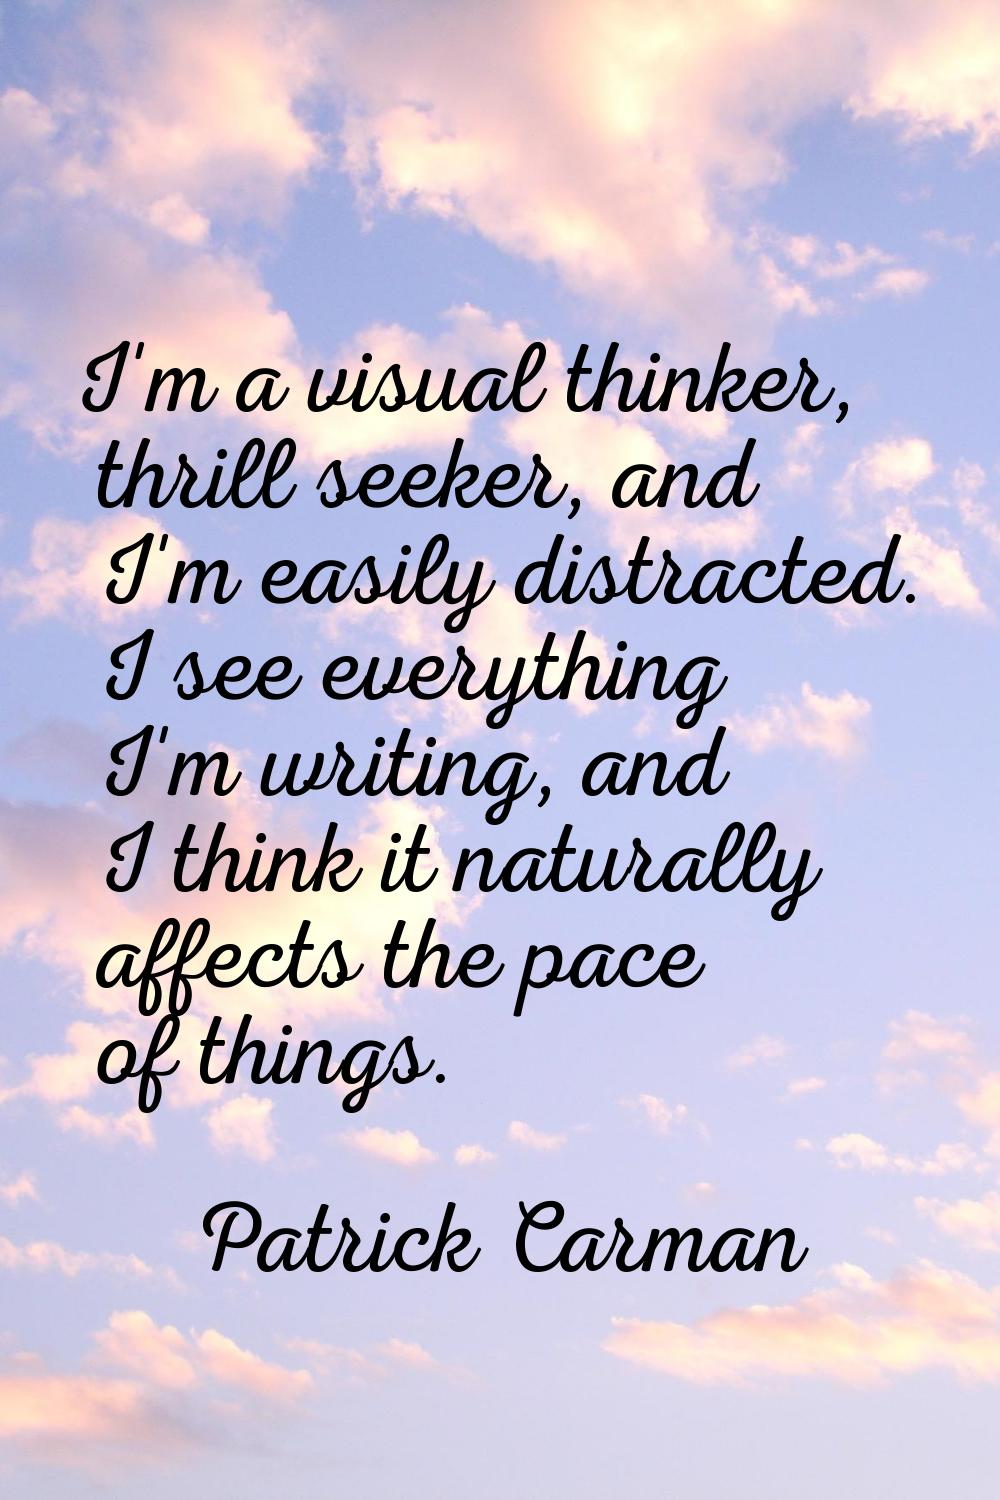 I'm a visual thinker, thrill seeker, and I'm easily distracted. I see everything I'm writing, and I